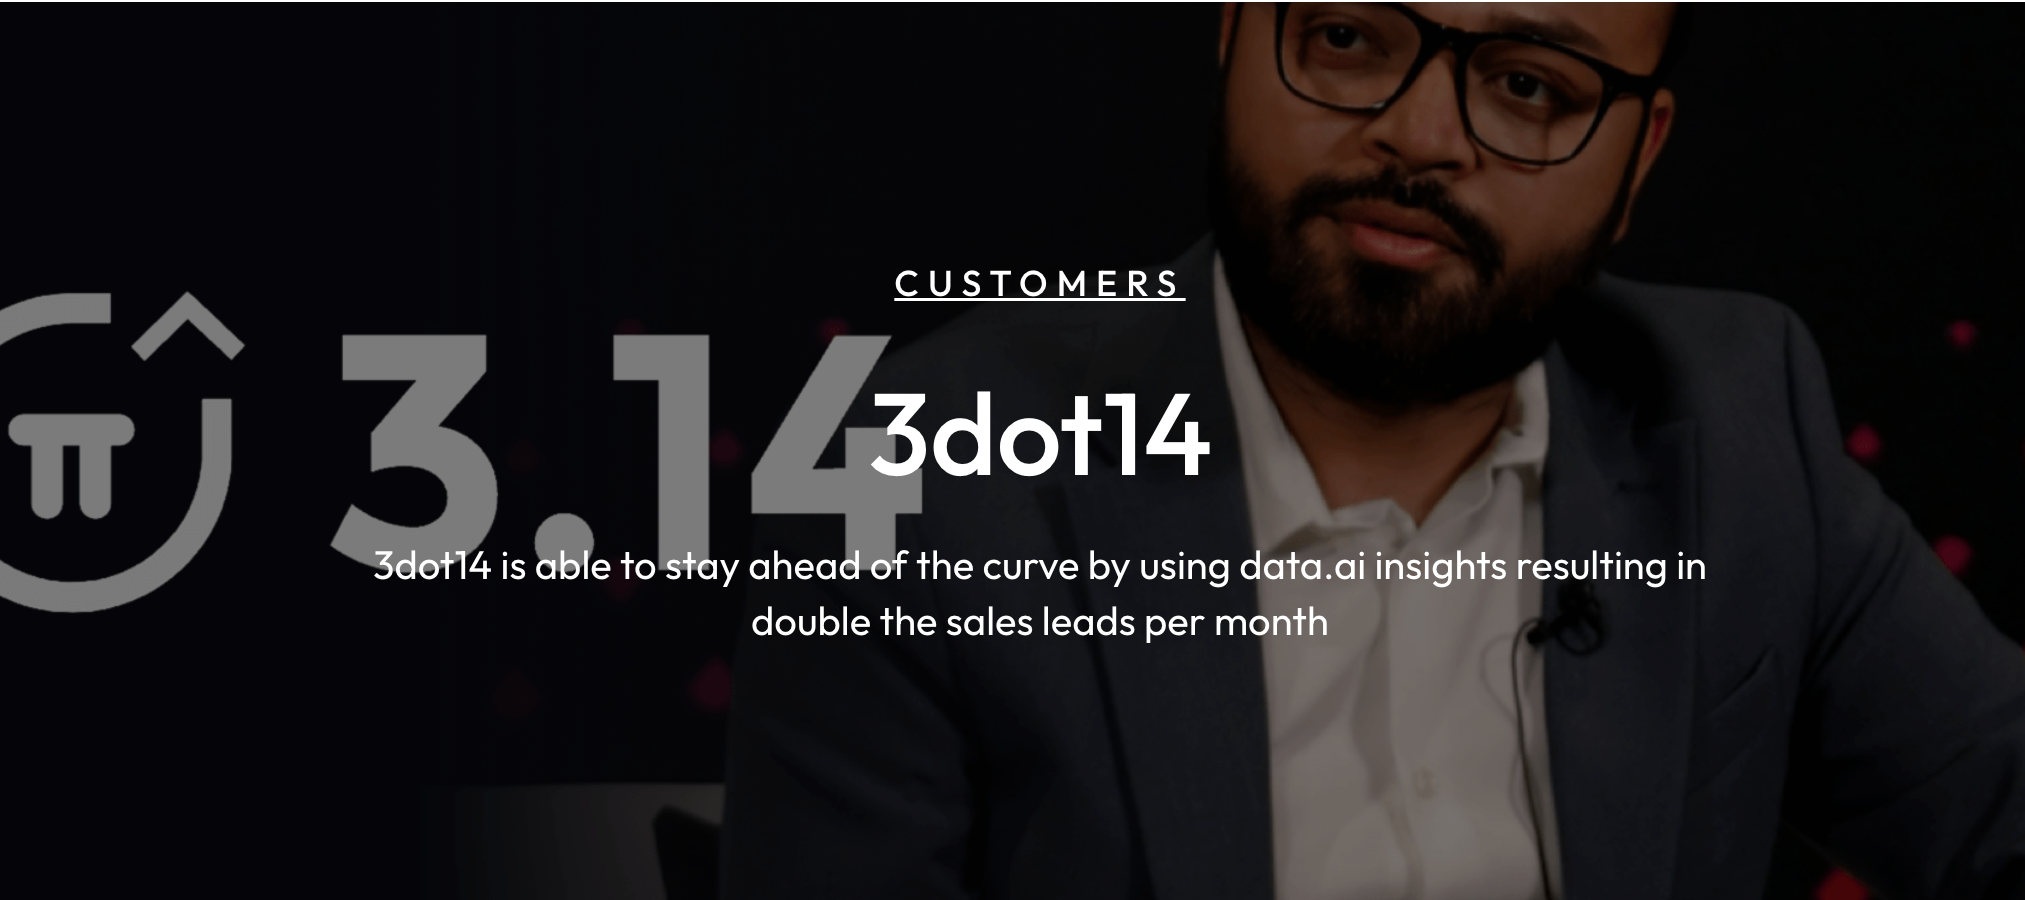 3dot14: Doubling their sales leads and improving conversation rate by 50%